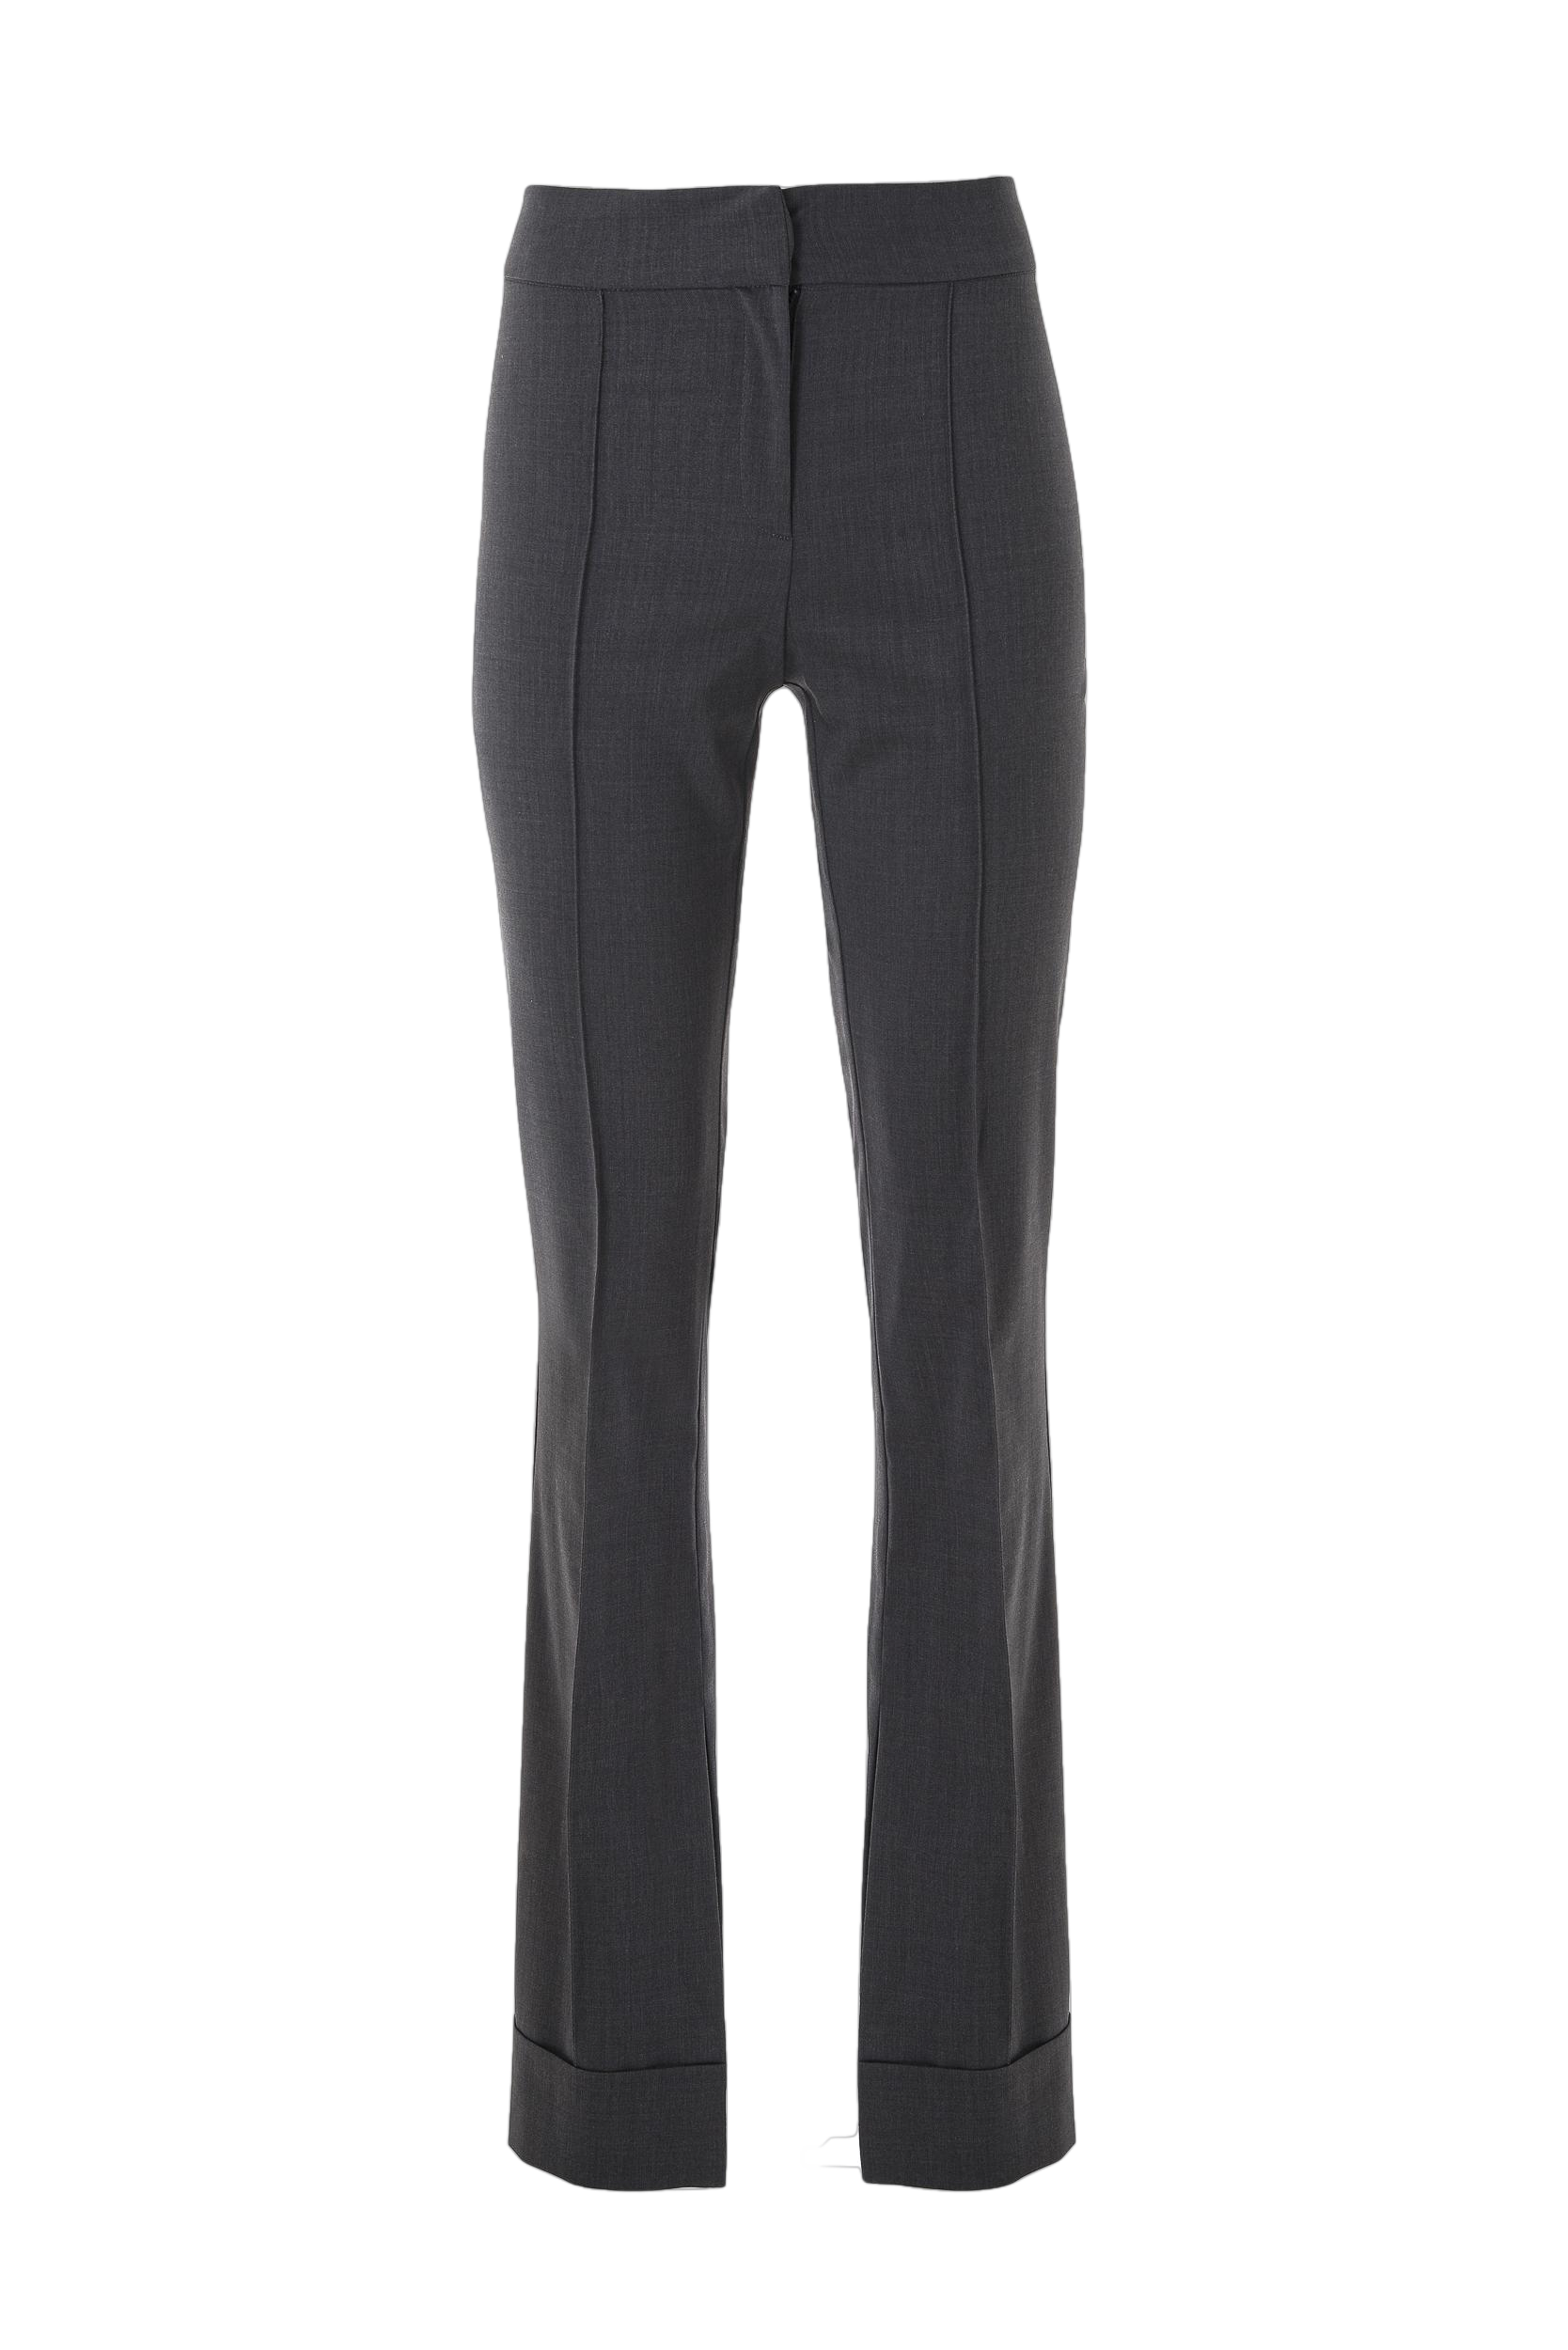 High rise side splits trousers in grey von Lita Couture